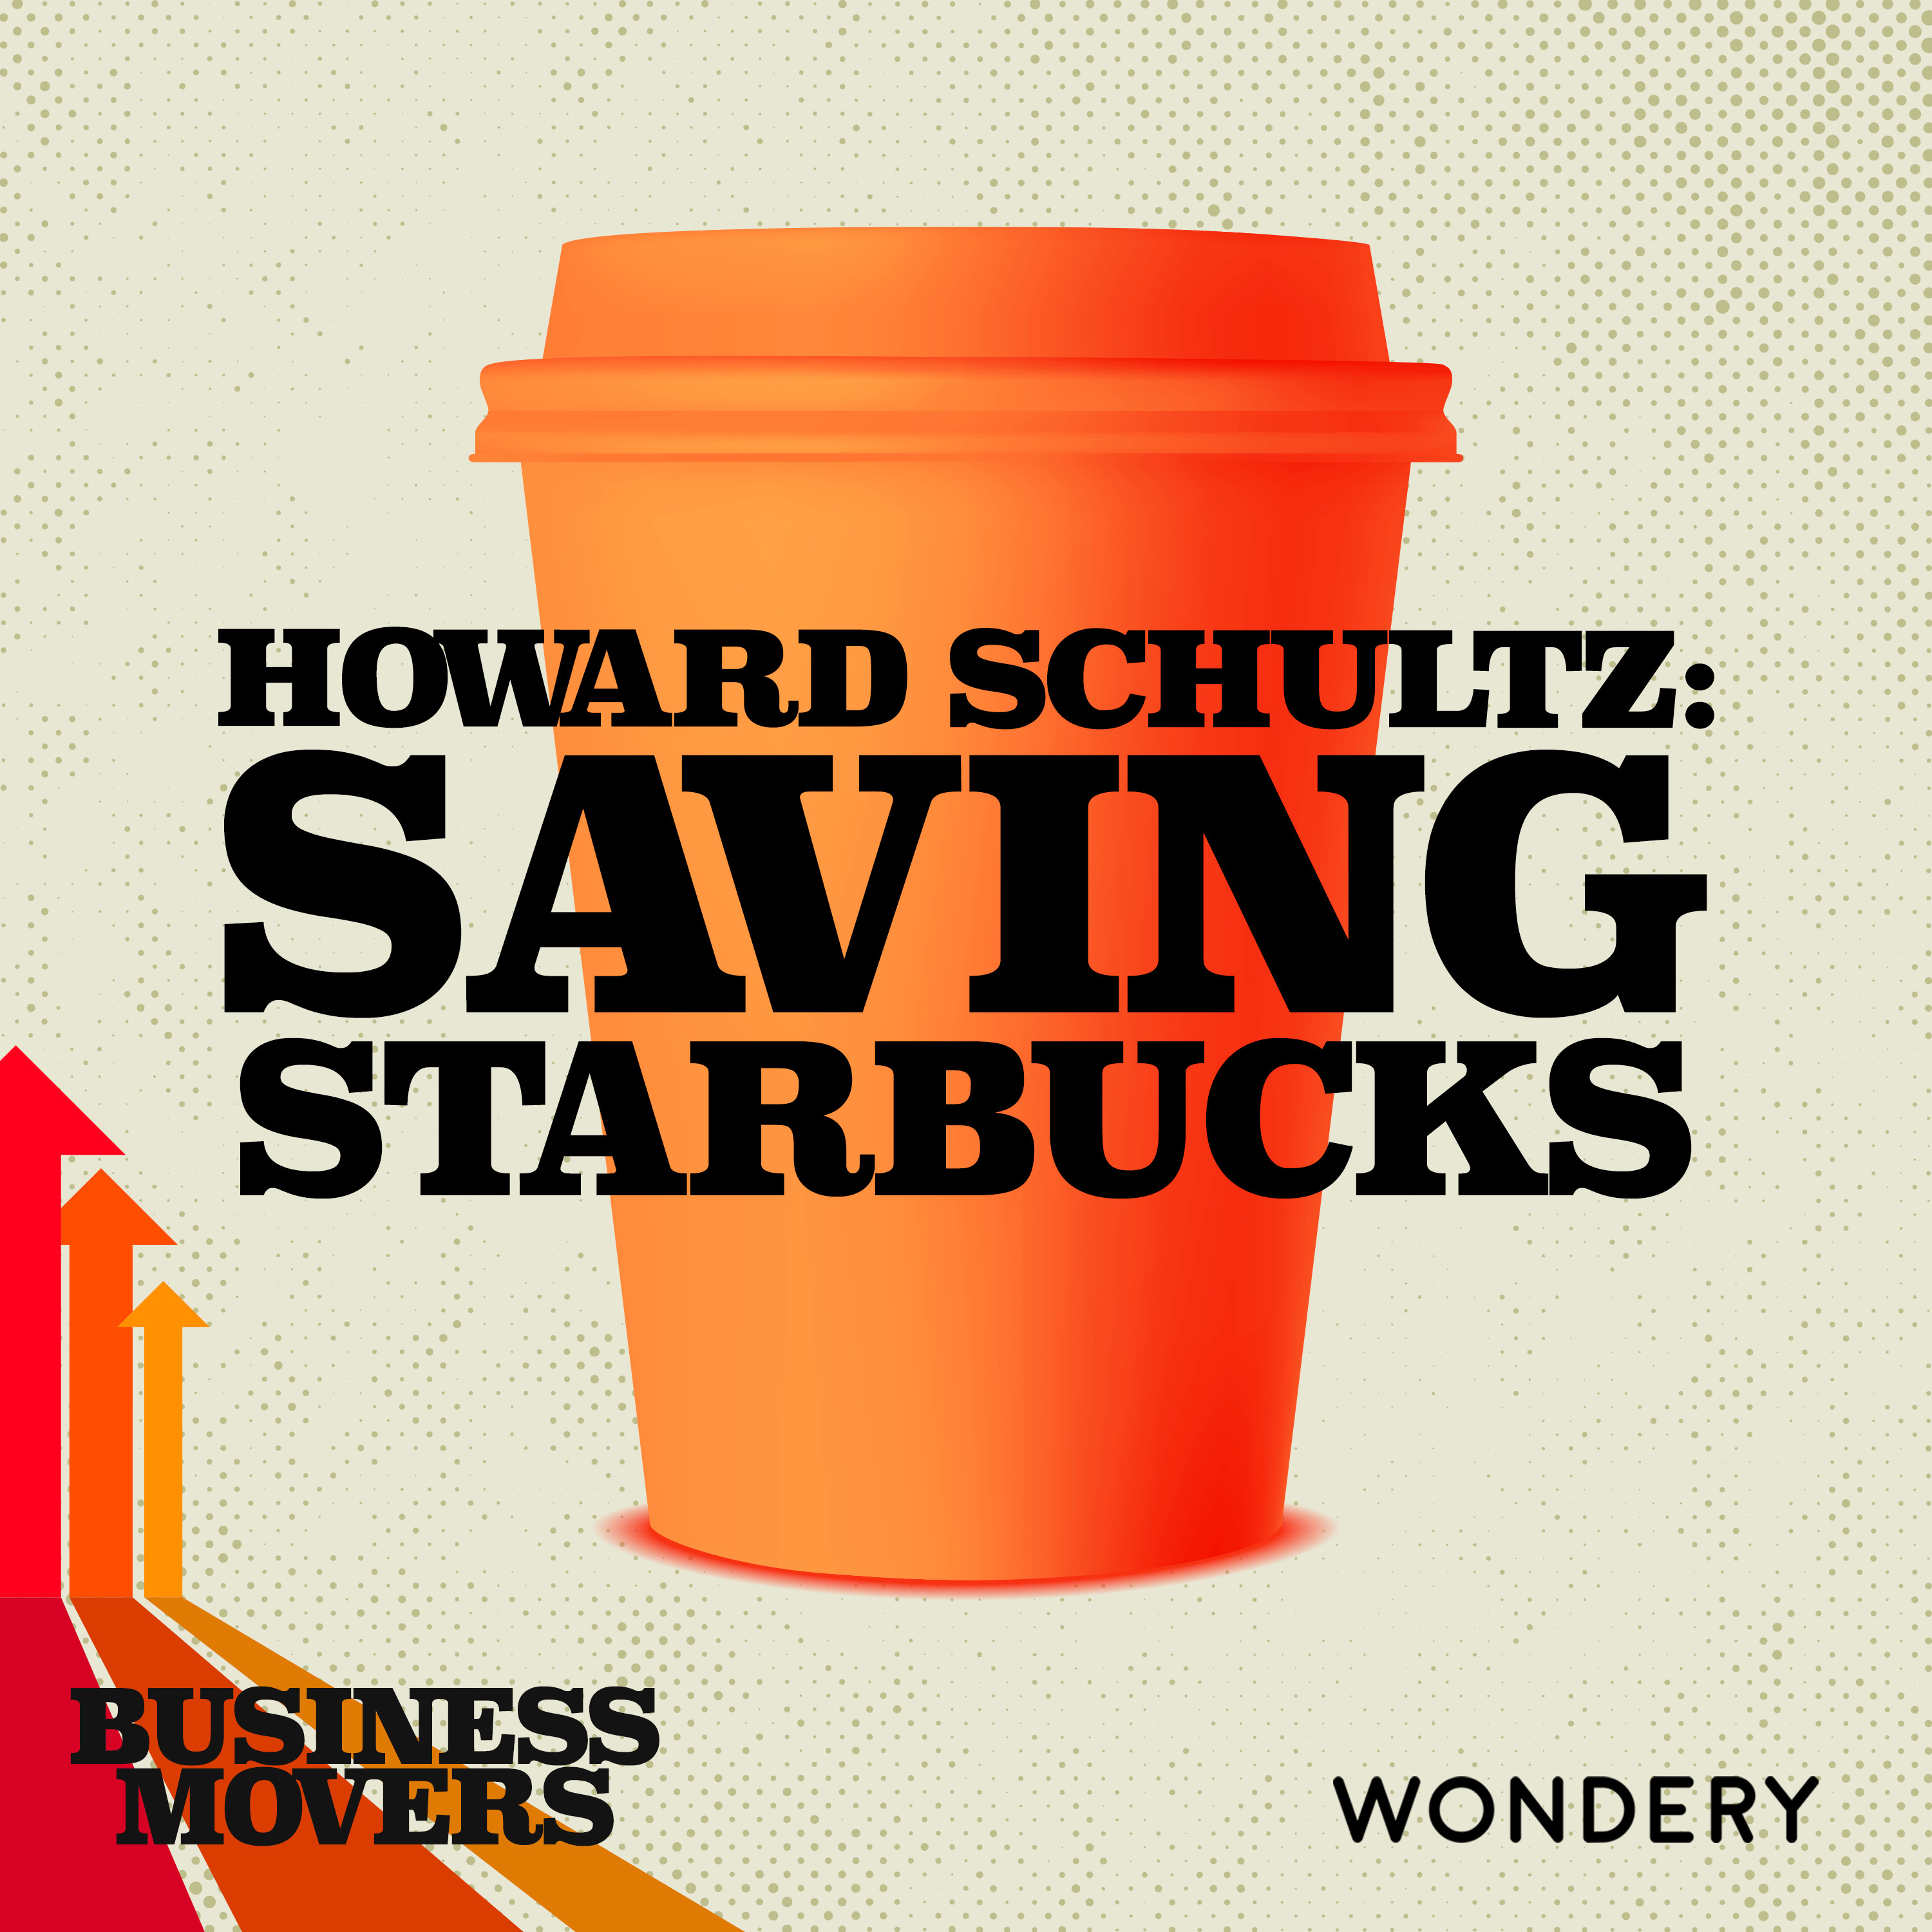 Howard Schultz: Saving Starbucks | Author Eric Scigliano Tells the Other Side of the Starbucks Story | 5